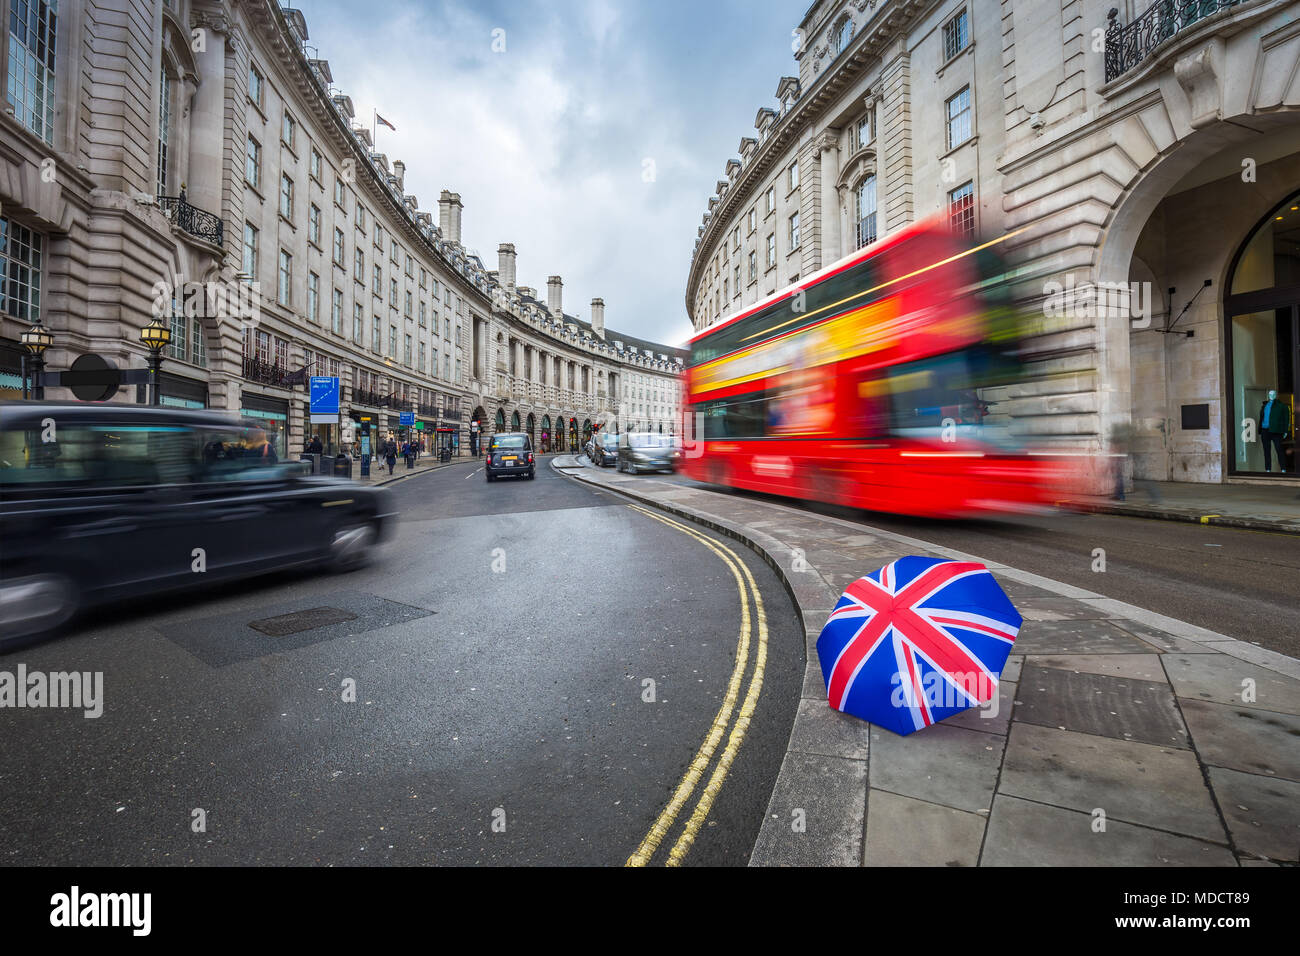 London, England - Iconic red double-decker bus and black taxies on the move on Regent Street with british umbrella Stock Photo